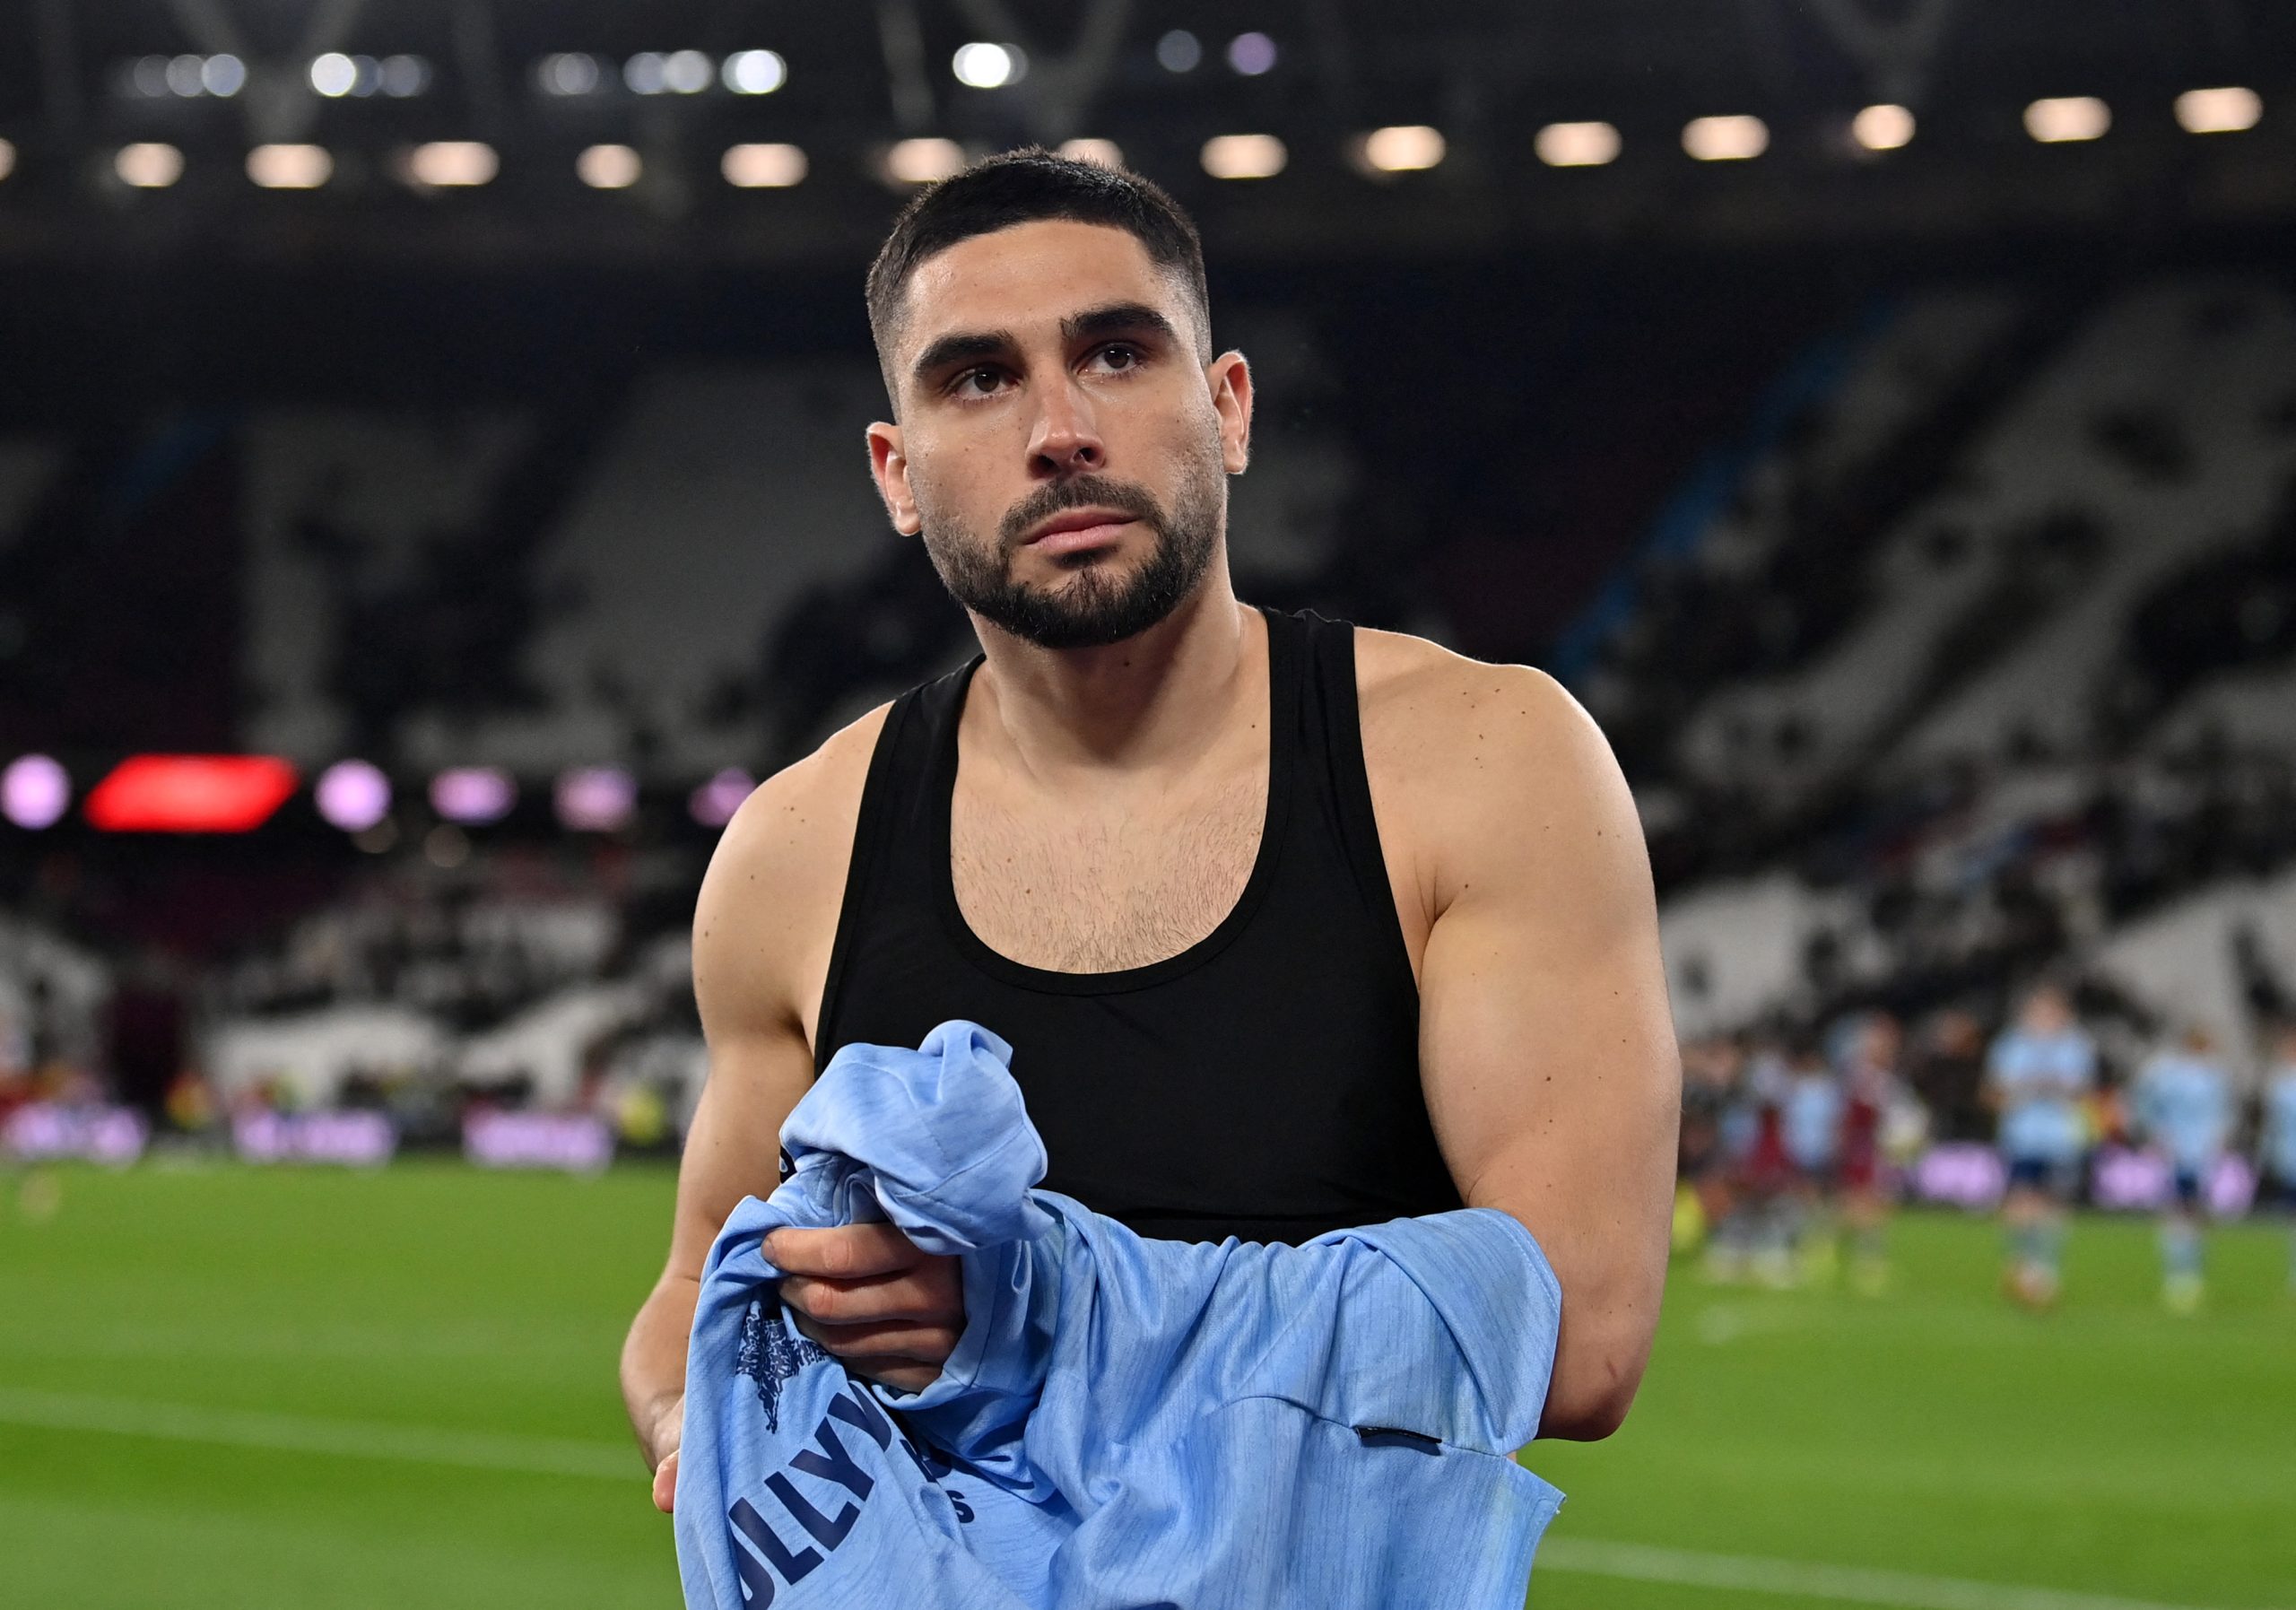 Neal Maupay reveals no regrets in copying Tottenham Hotspur star's celebrations.